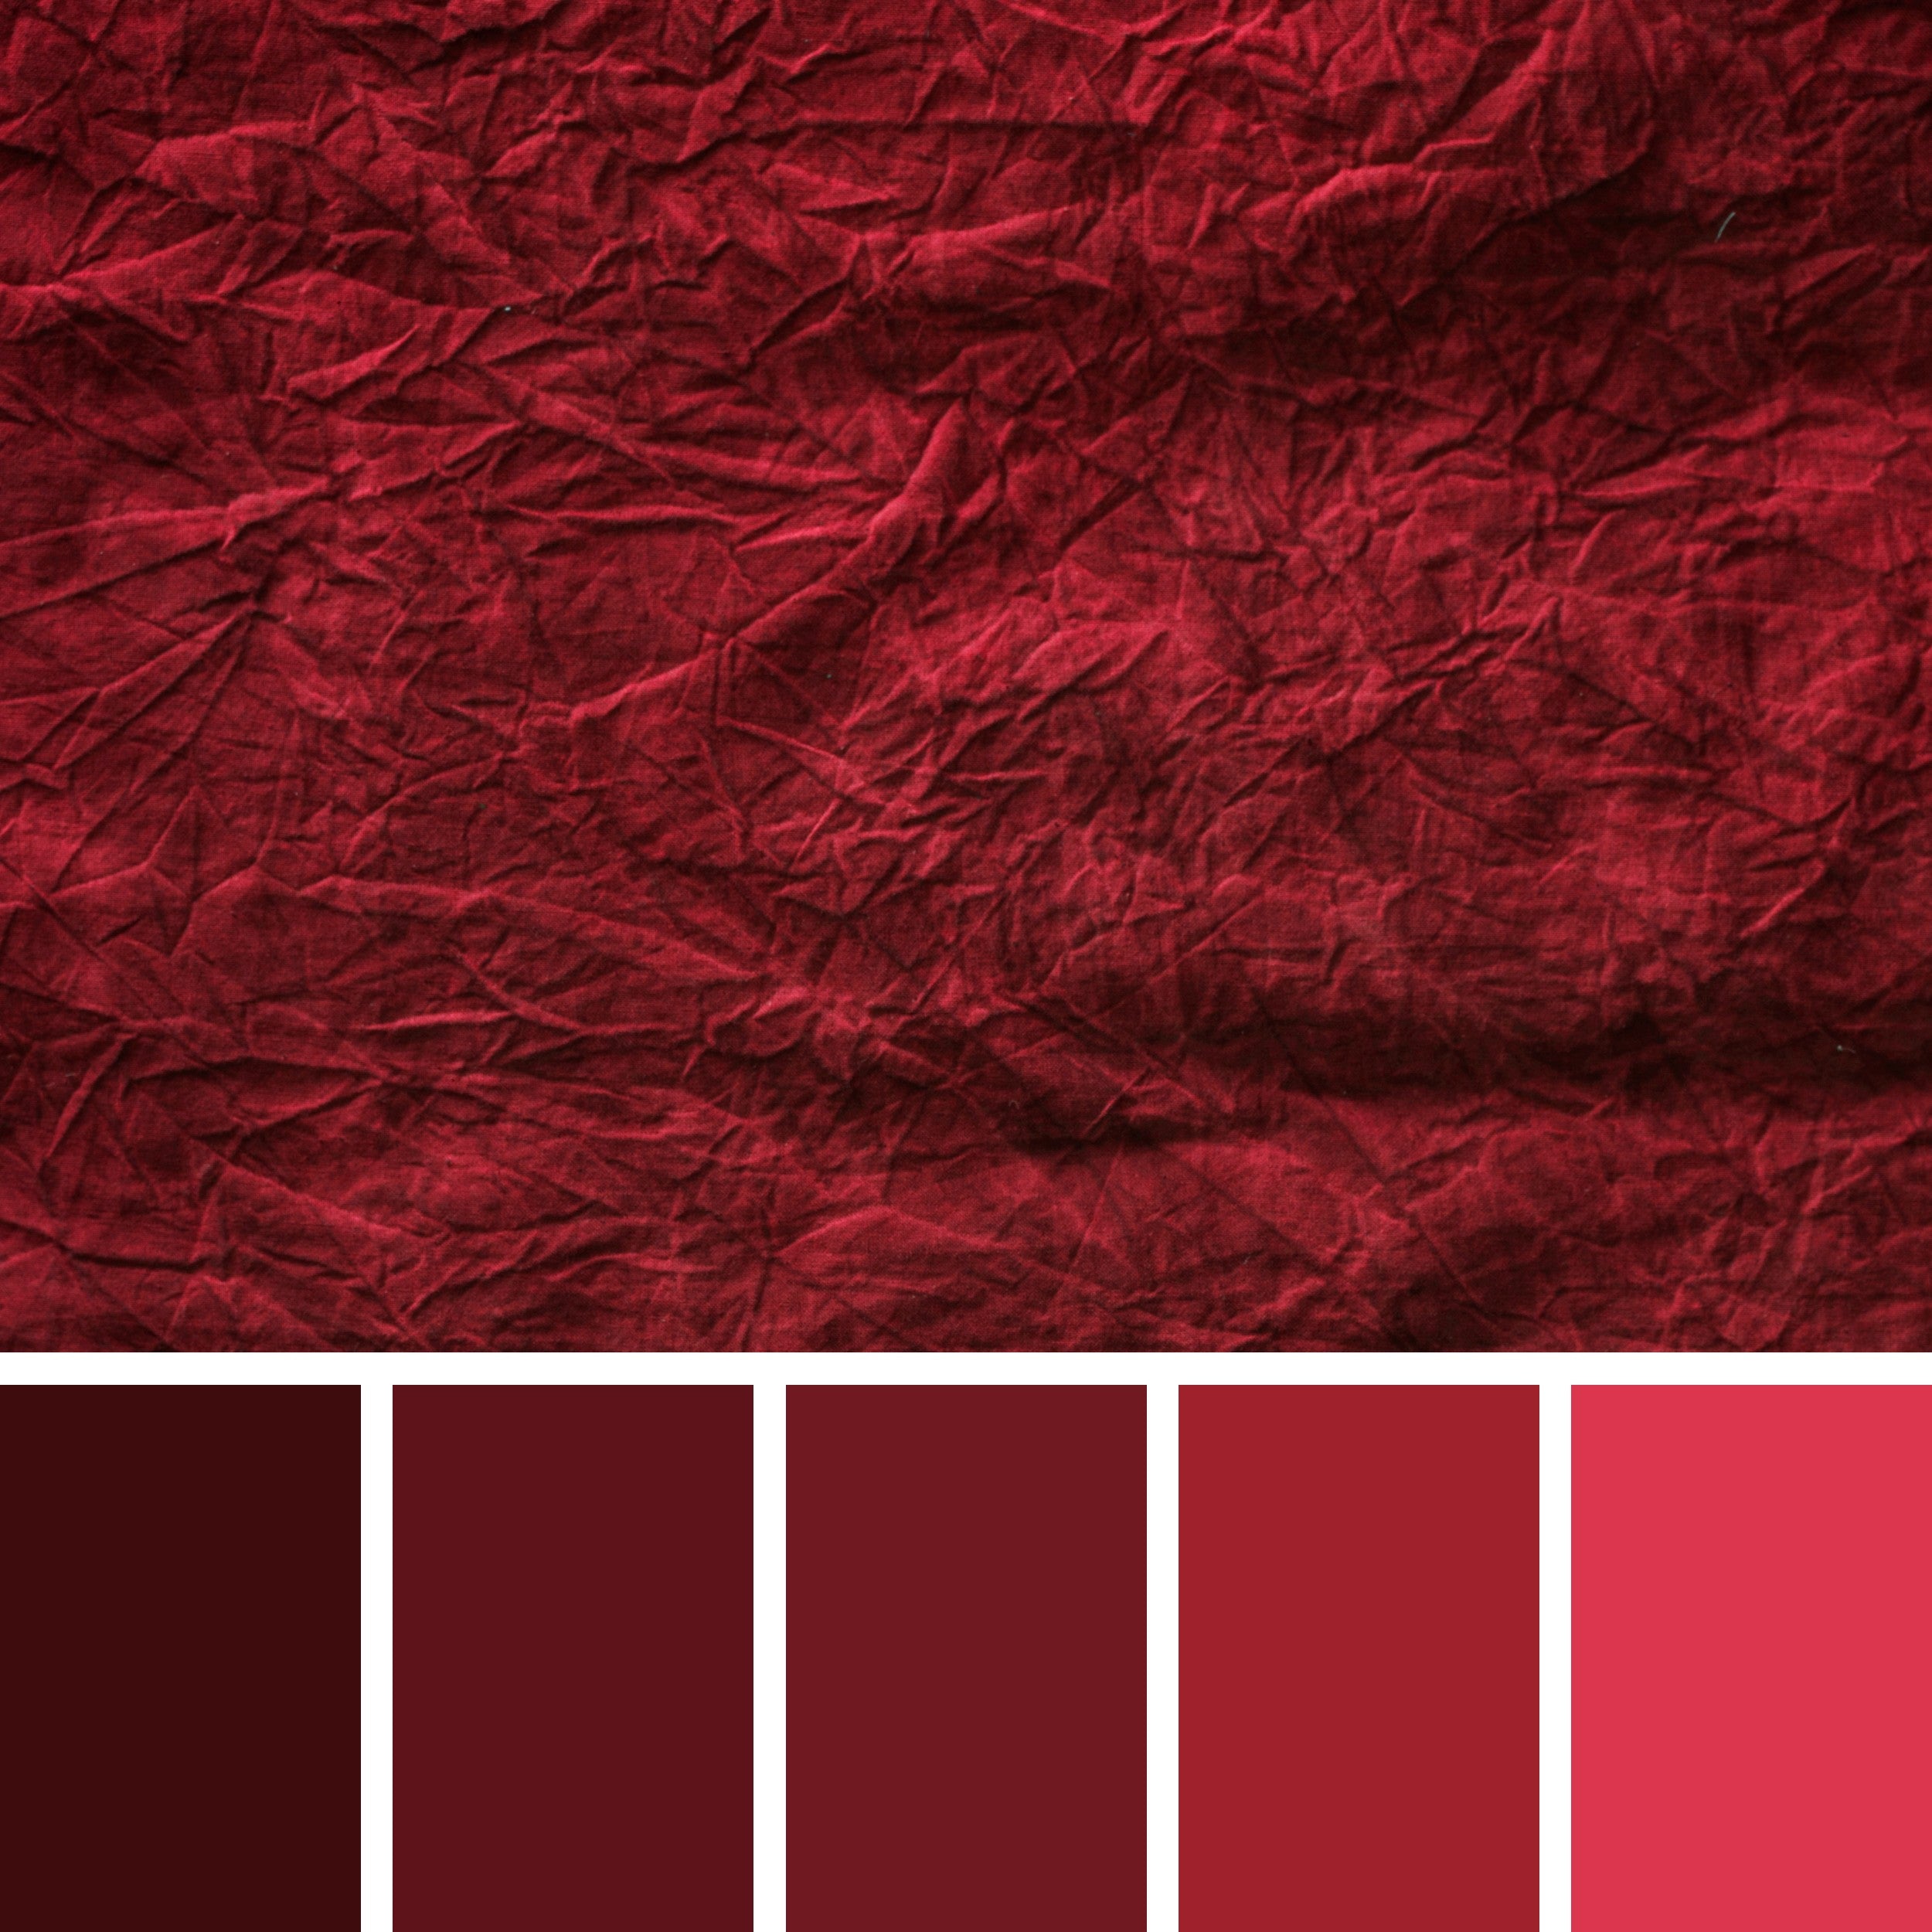 Maroon-Shades-Color-Palette